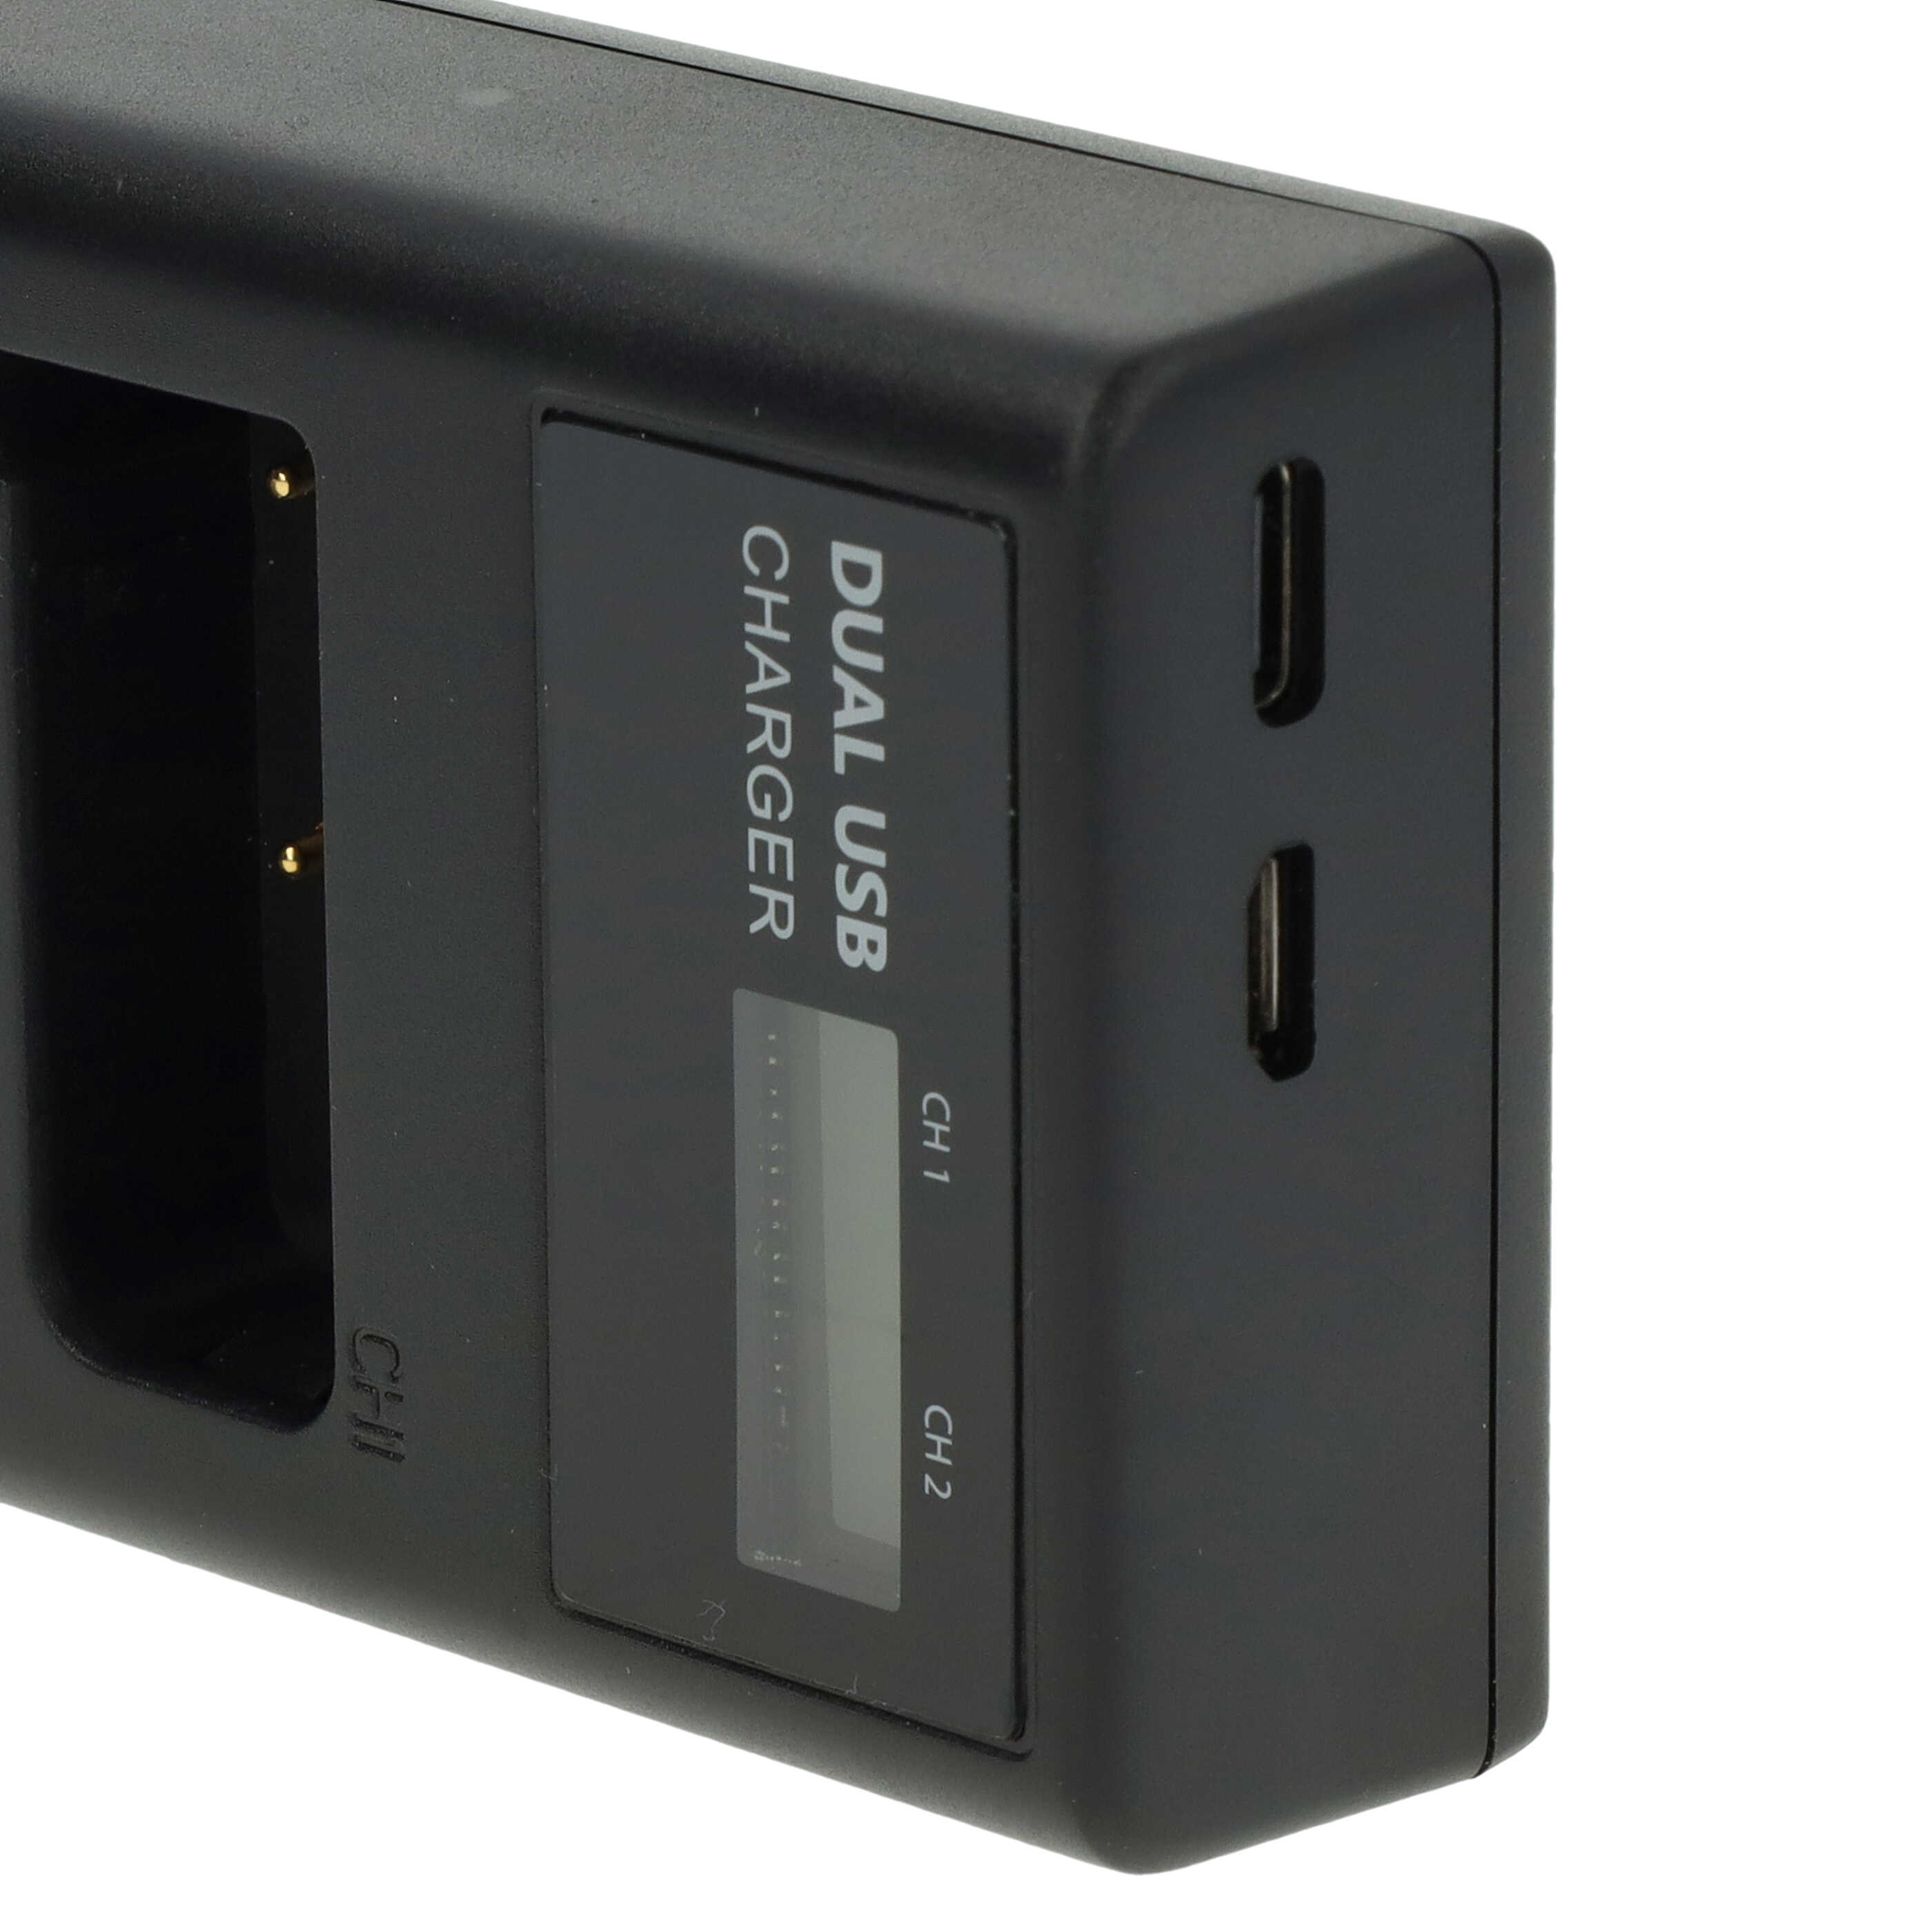 Battery Charger suitable for D3000 Camera etc. - 0.5 A, 8.4 V